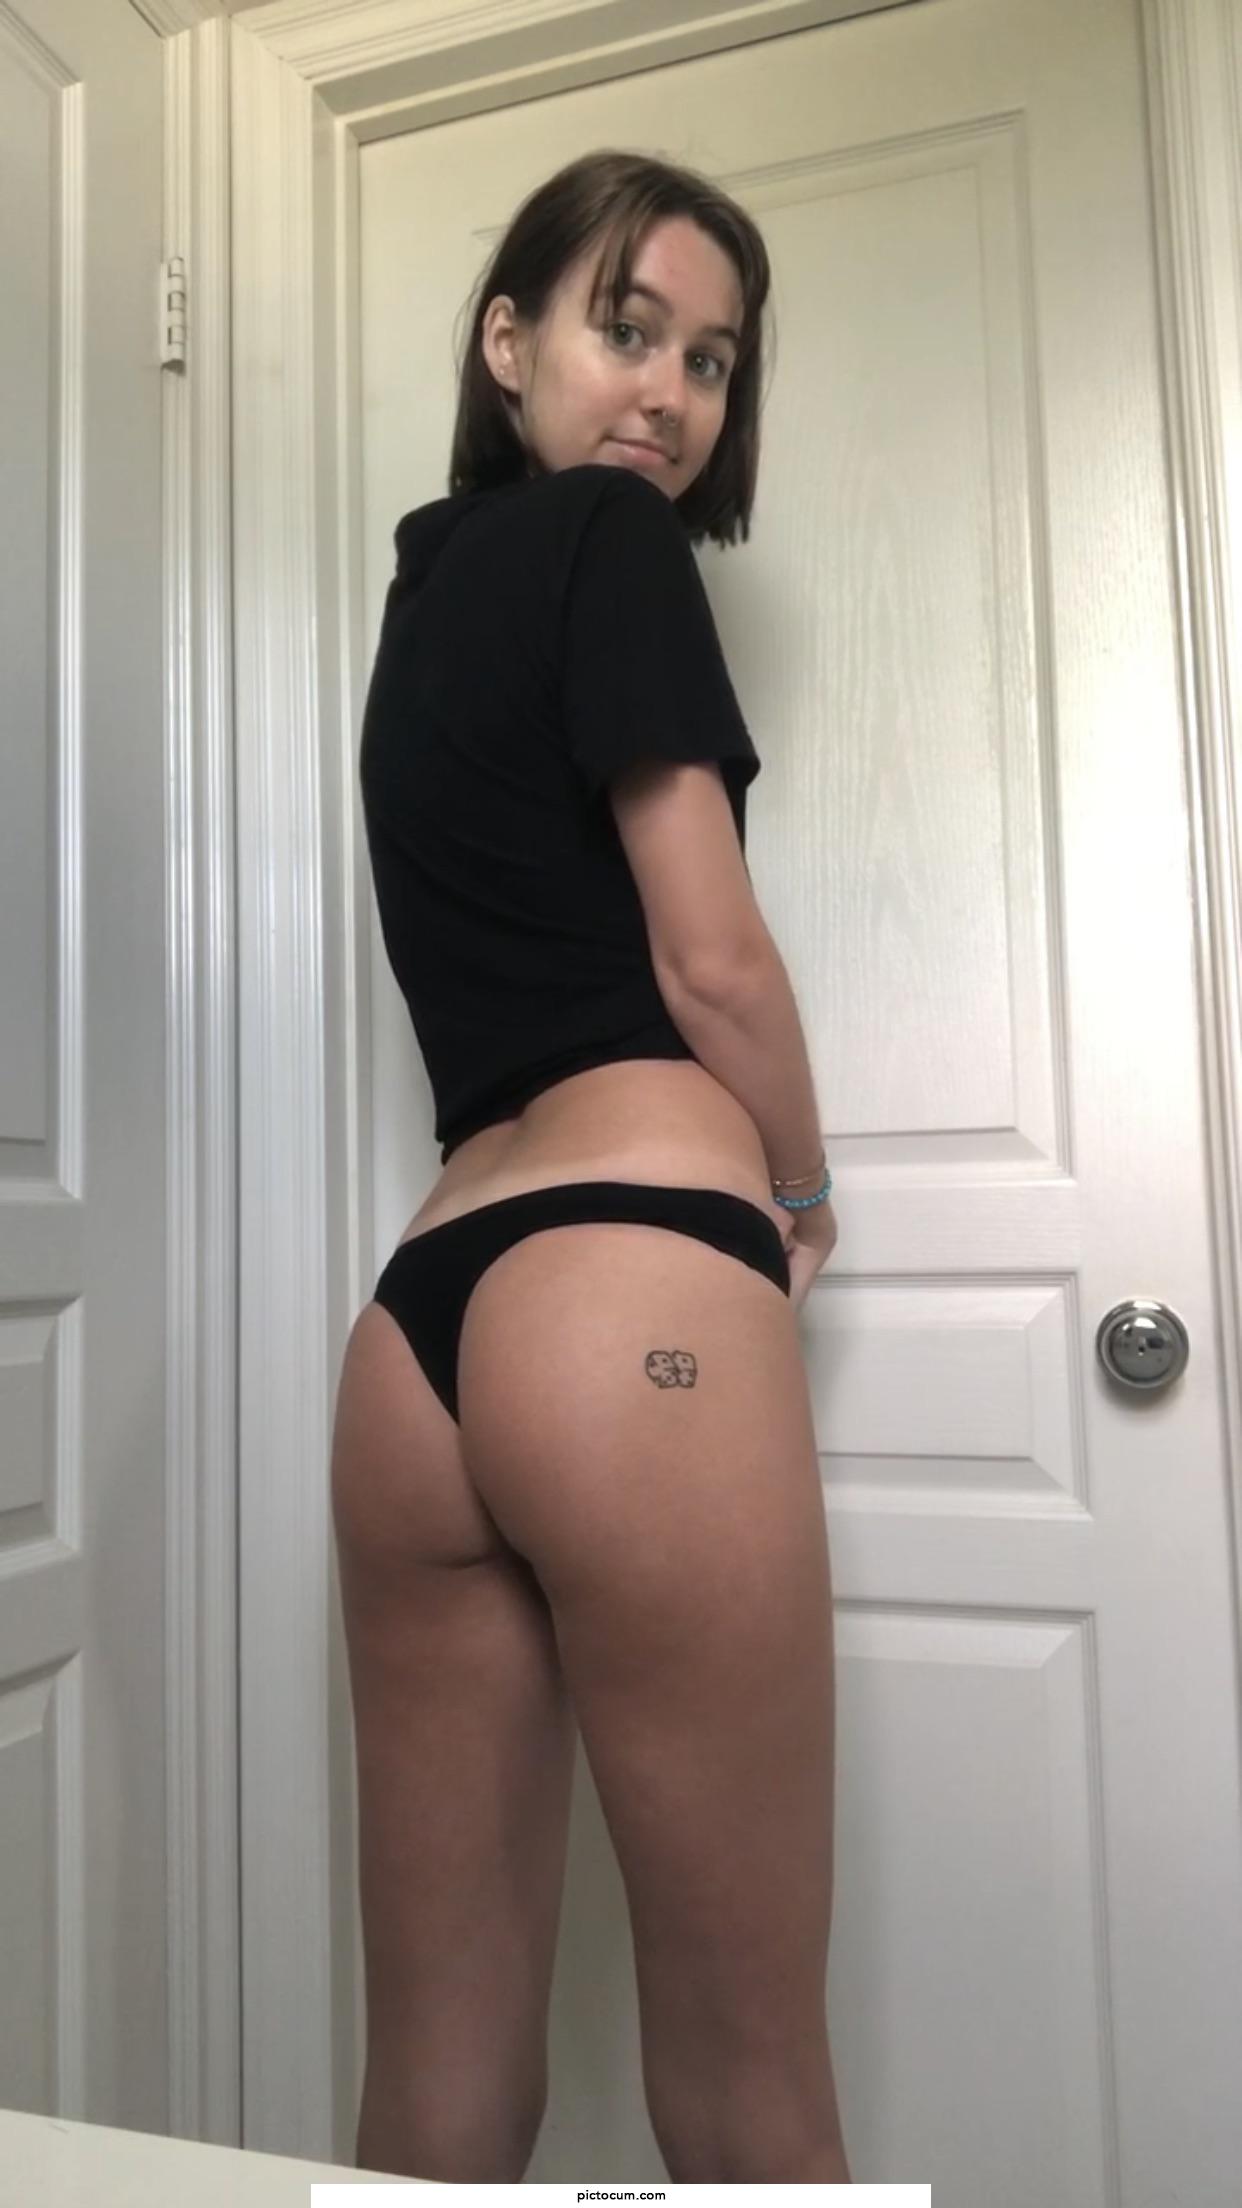 Do you like my 19 year old ass